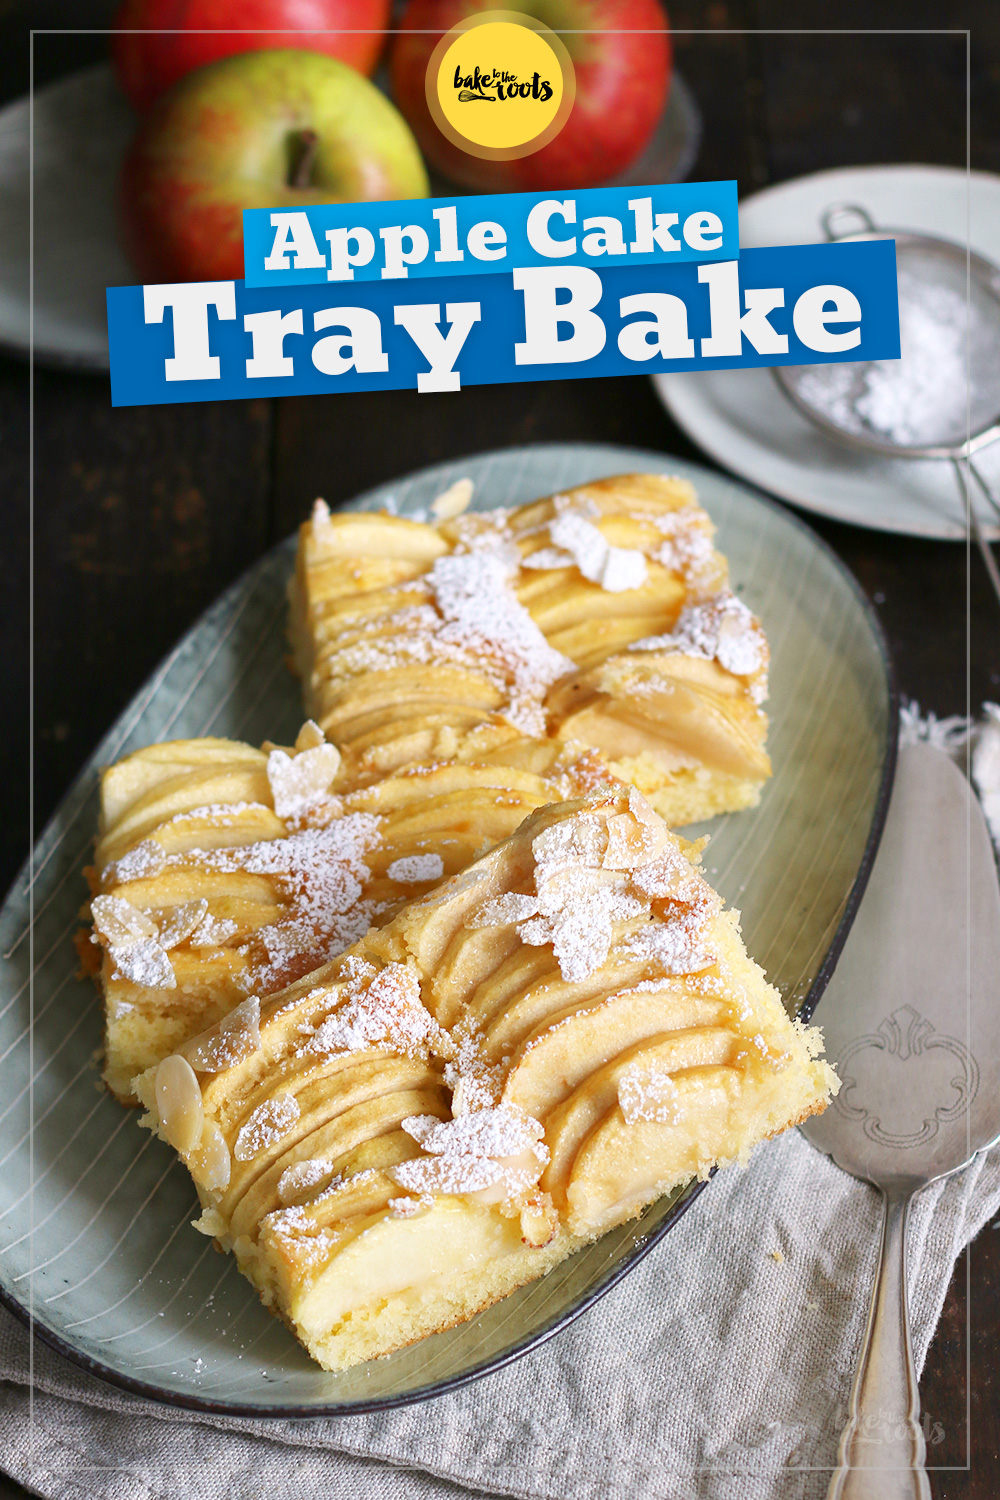 Apple Cake Tray Bake | Bake to the roots